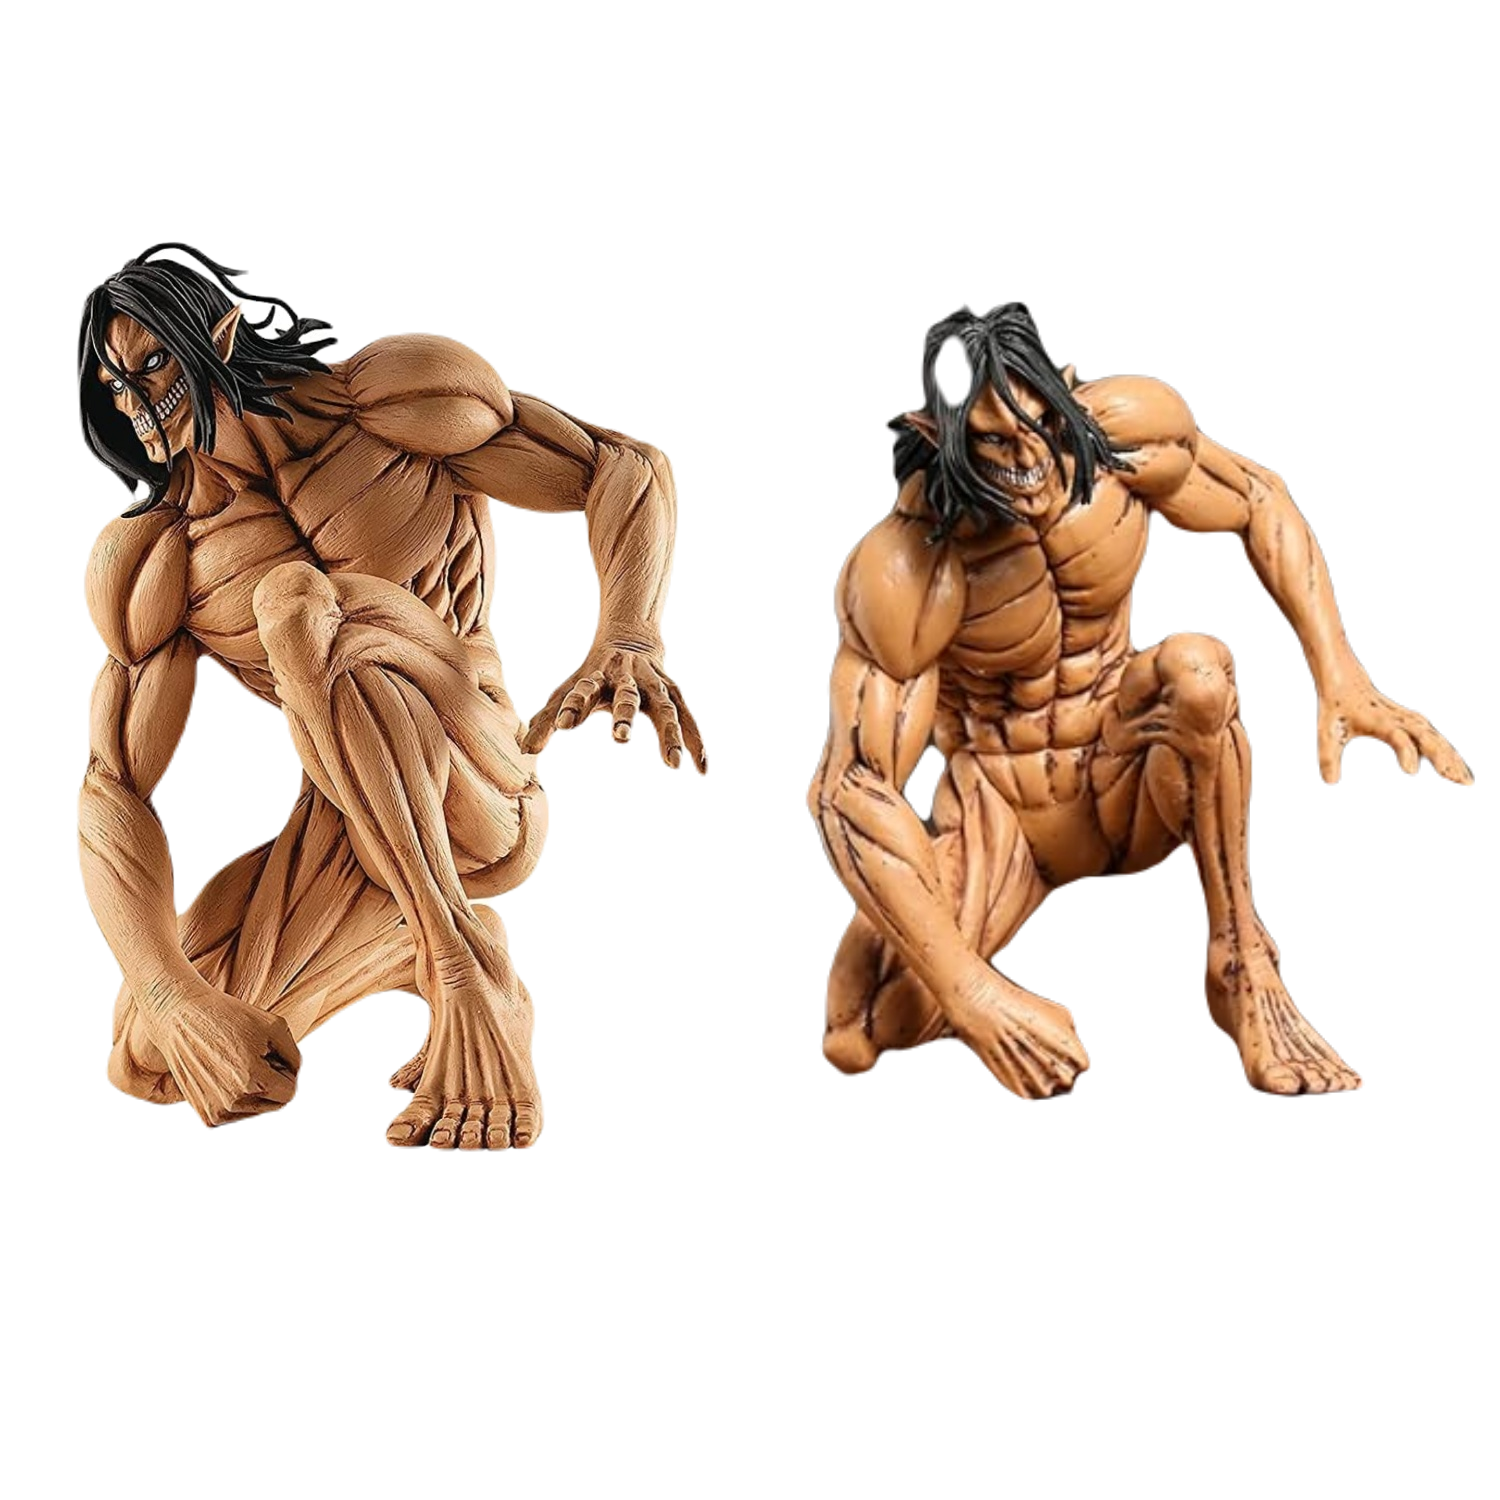 Аttack on Titan Toys- Аction Figures - Eren Yeager Figure (Brown) 